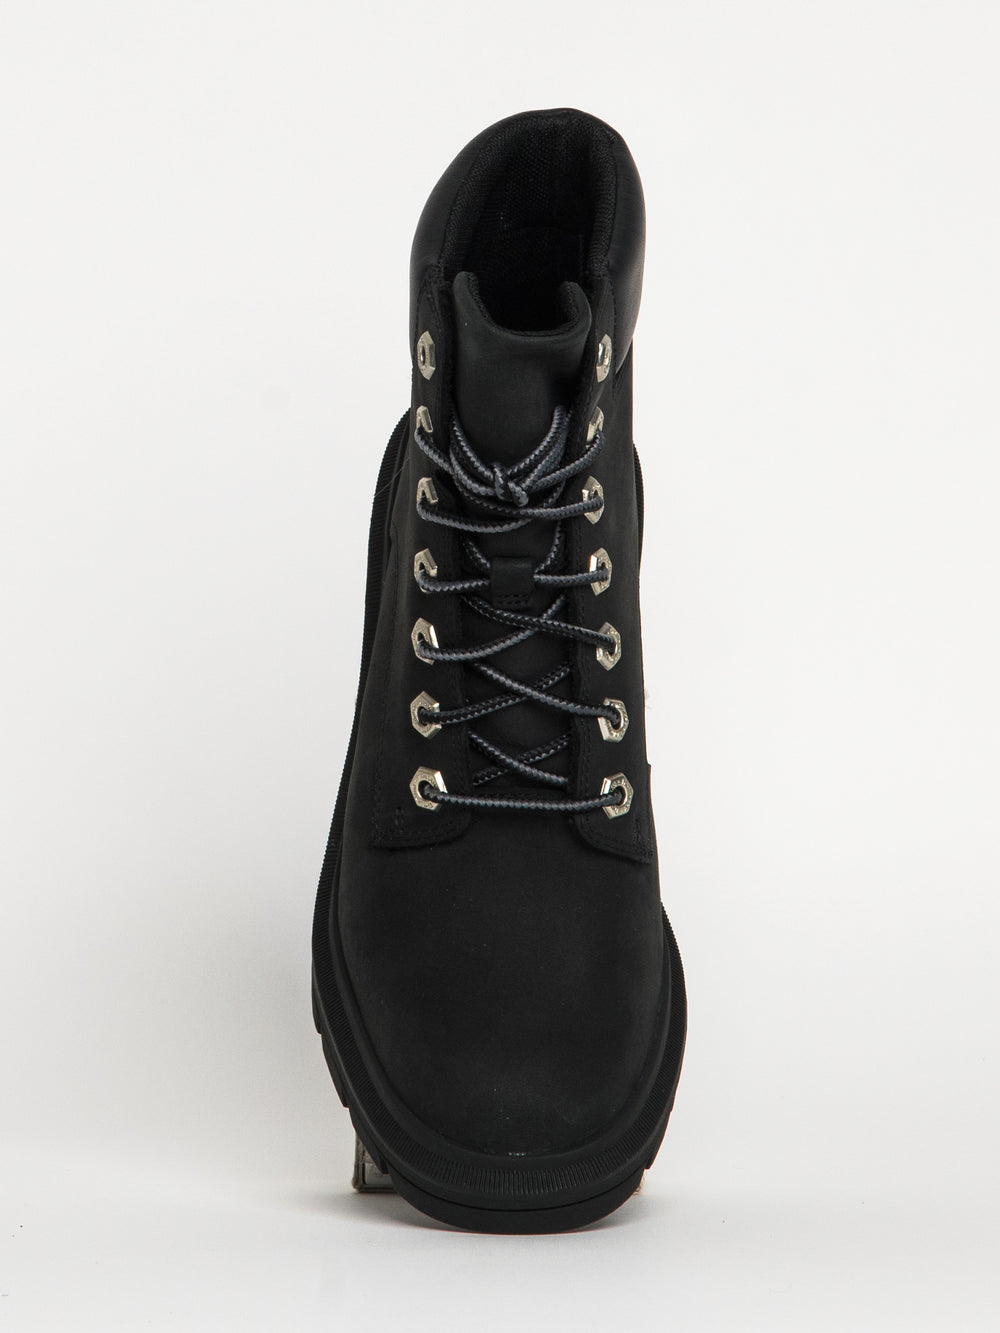 WOMENS TIMBERLAND ALLINGTON HEIGHTS 6' LACE UP BOOT